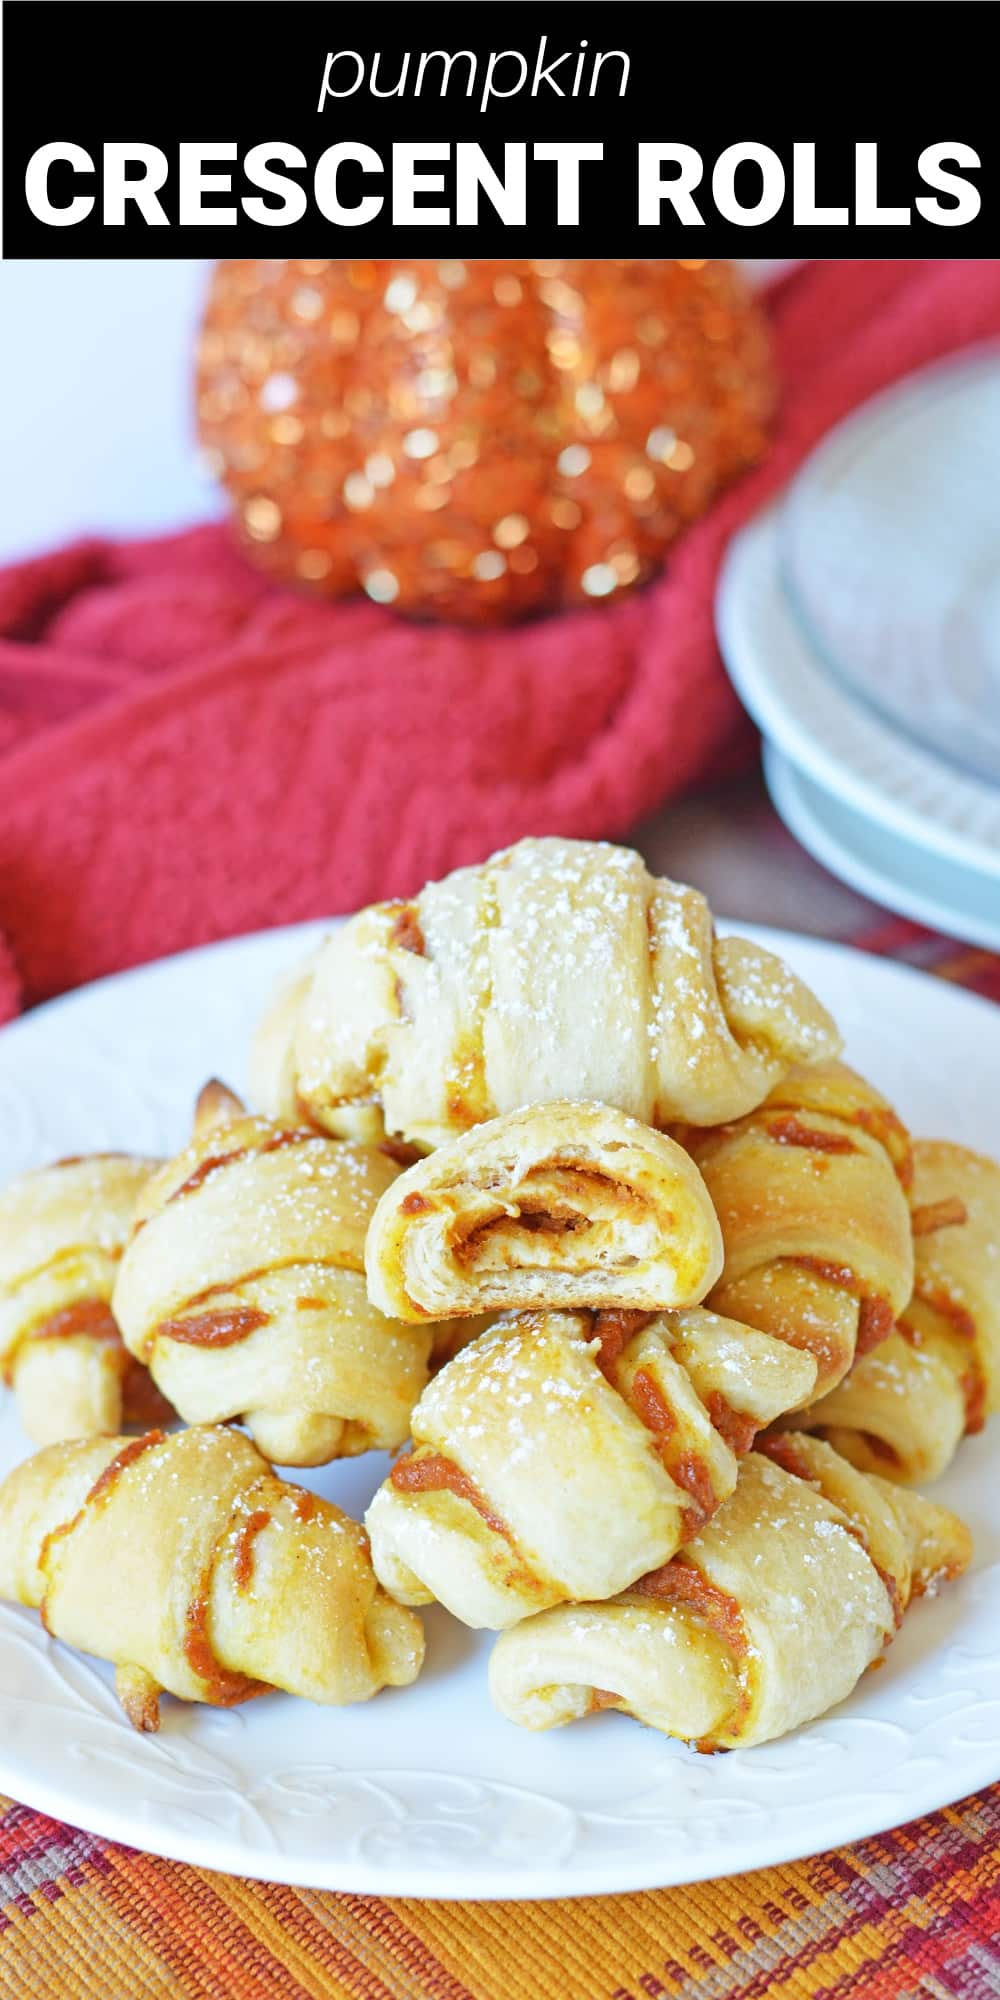 These delectable Pumpkin Crescent Rolls have all the warm and delicious flavors of the fall season wrapped into one mini sized croissant. Made with just a few simple ingredients, they are so easy to make and are perfect for breakfast, brunch, or served with a scoop of ice cream for dessert. 